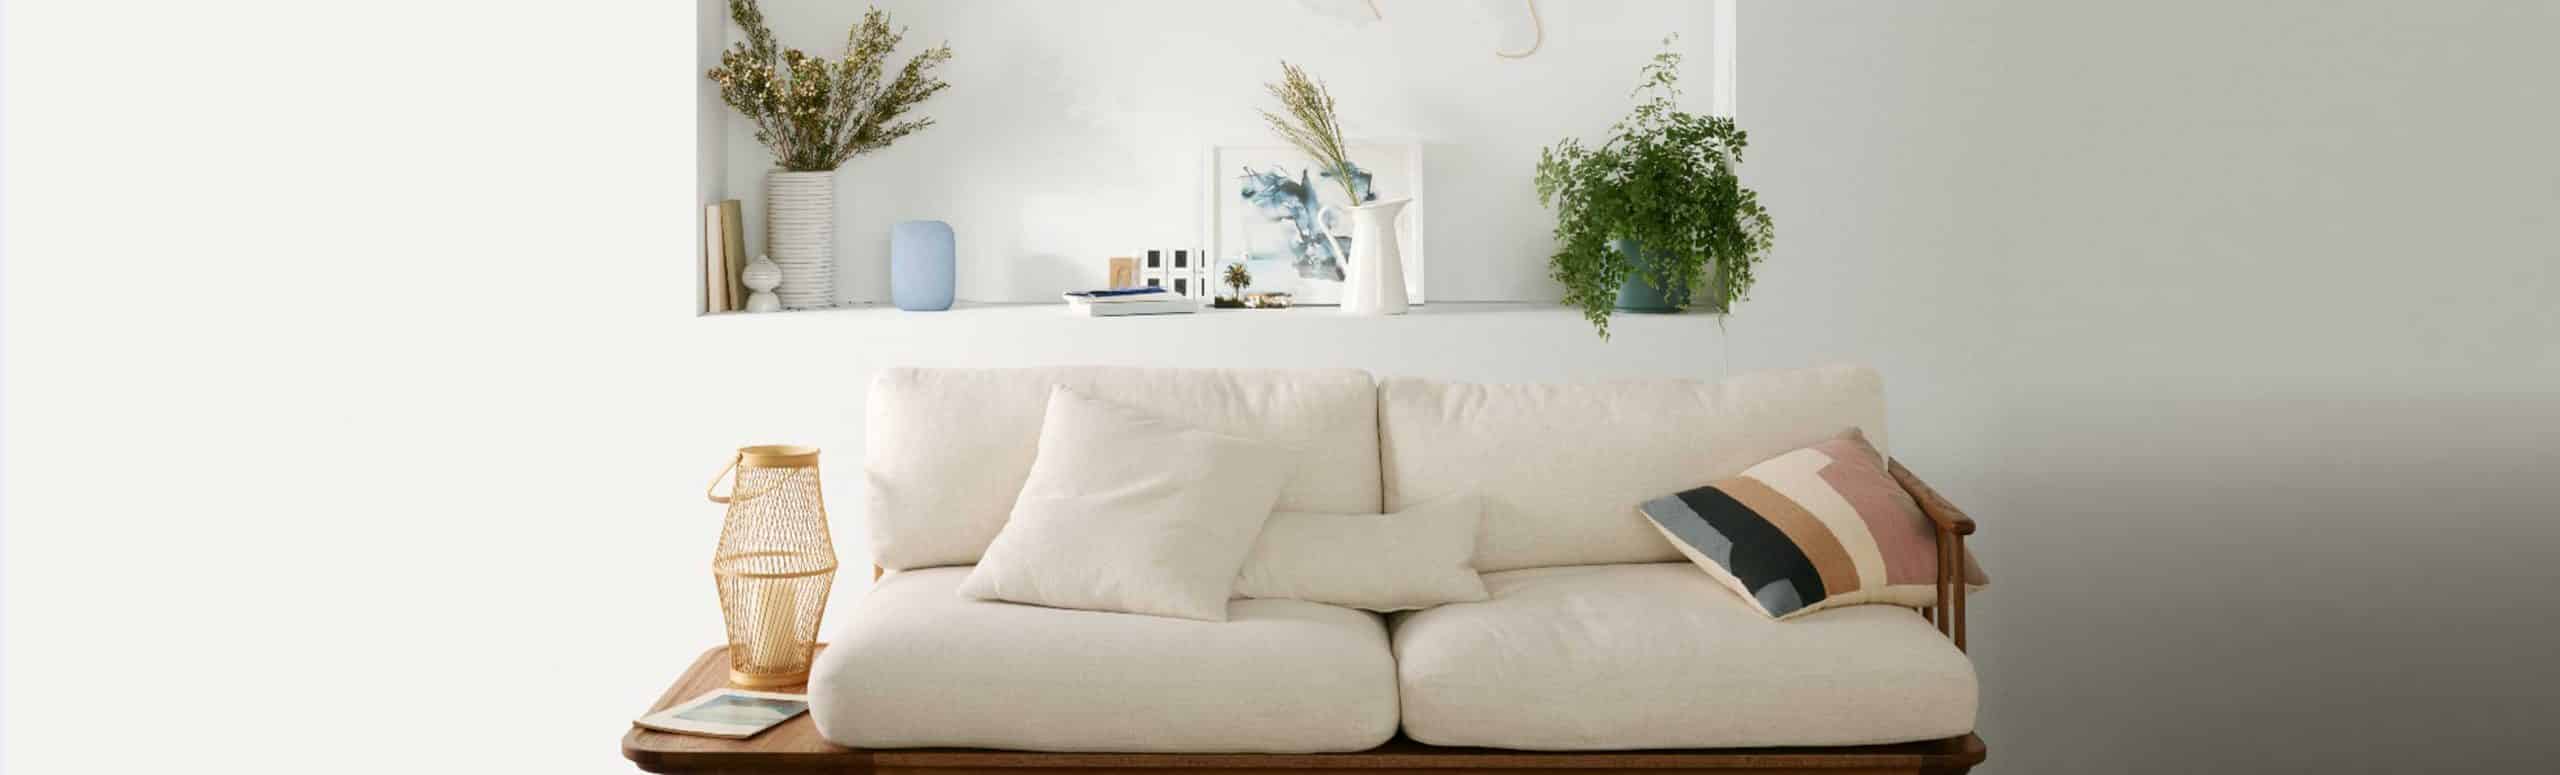 Couch in an open white room with plants and a light blue Google Nest in the back